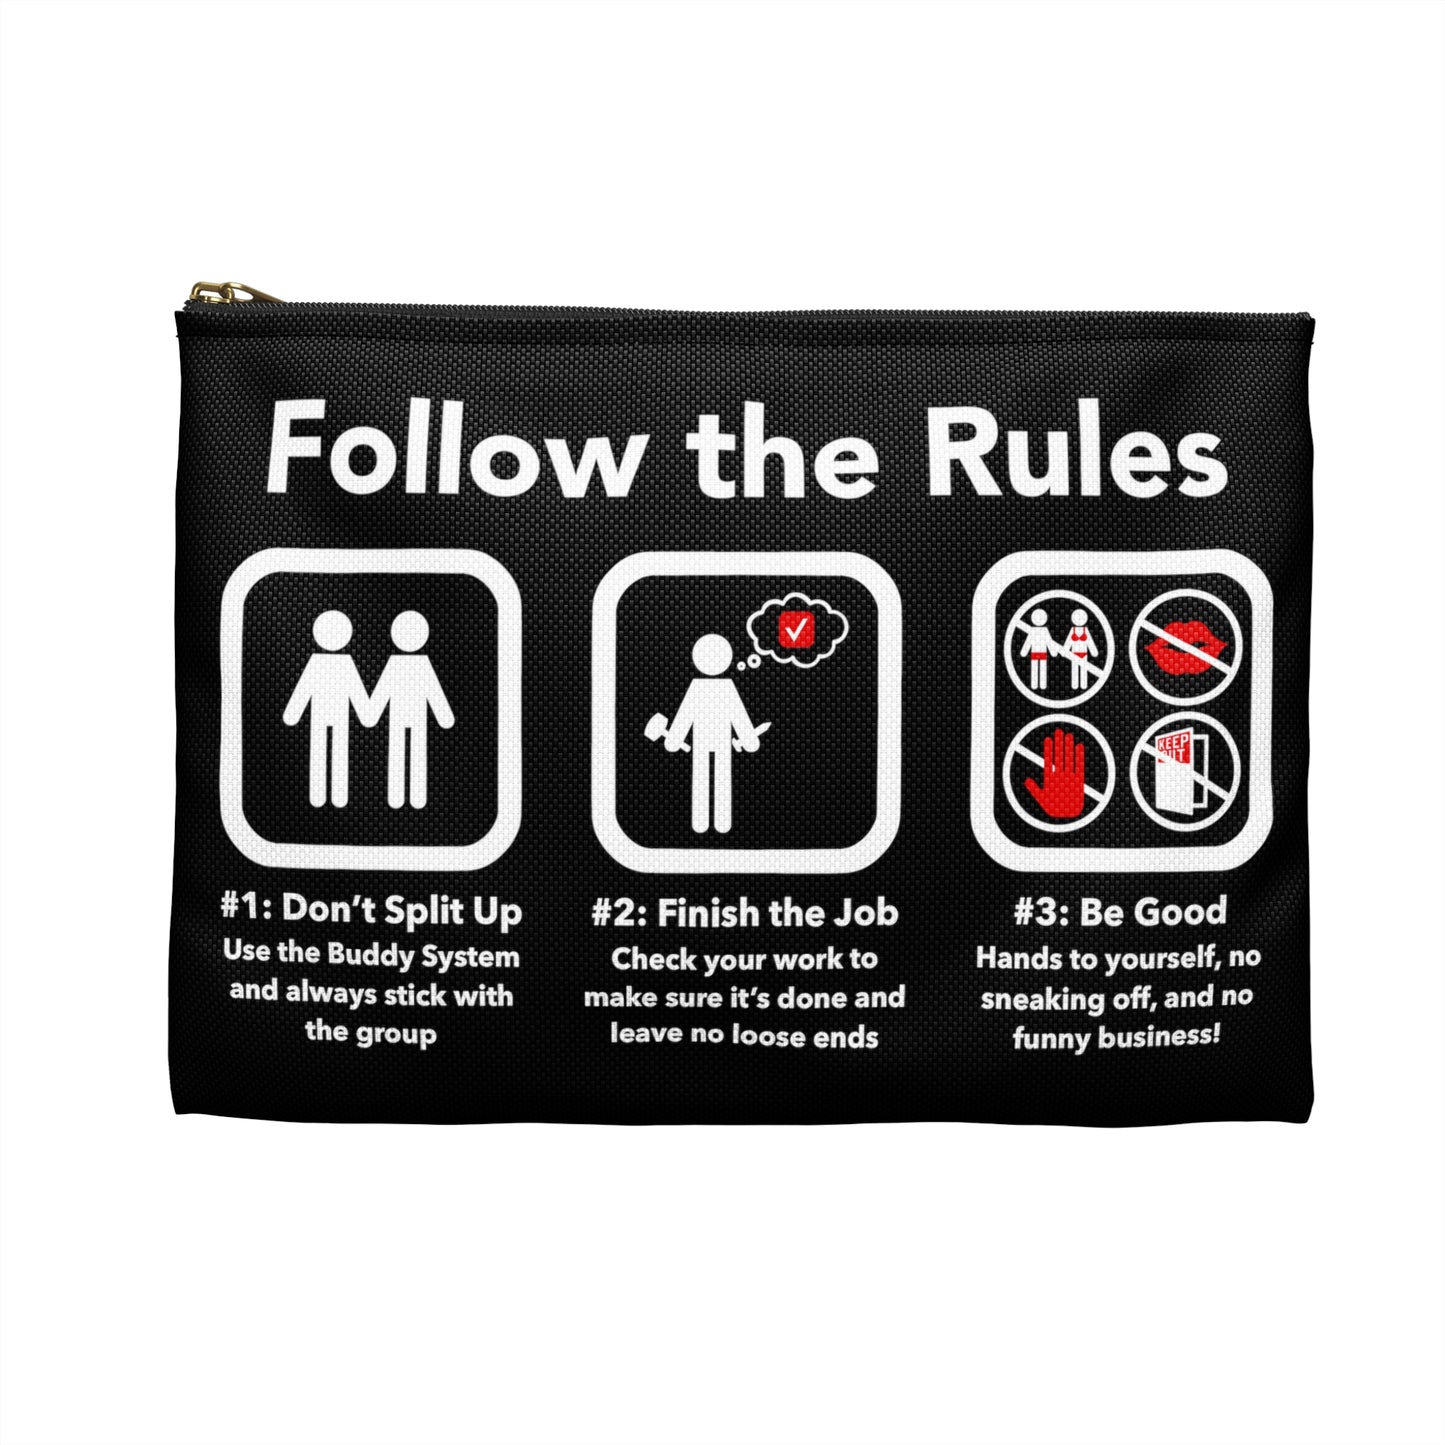 The Rules Pencil Case